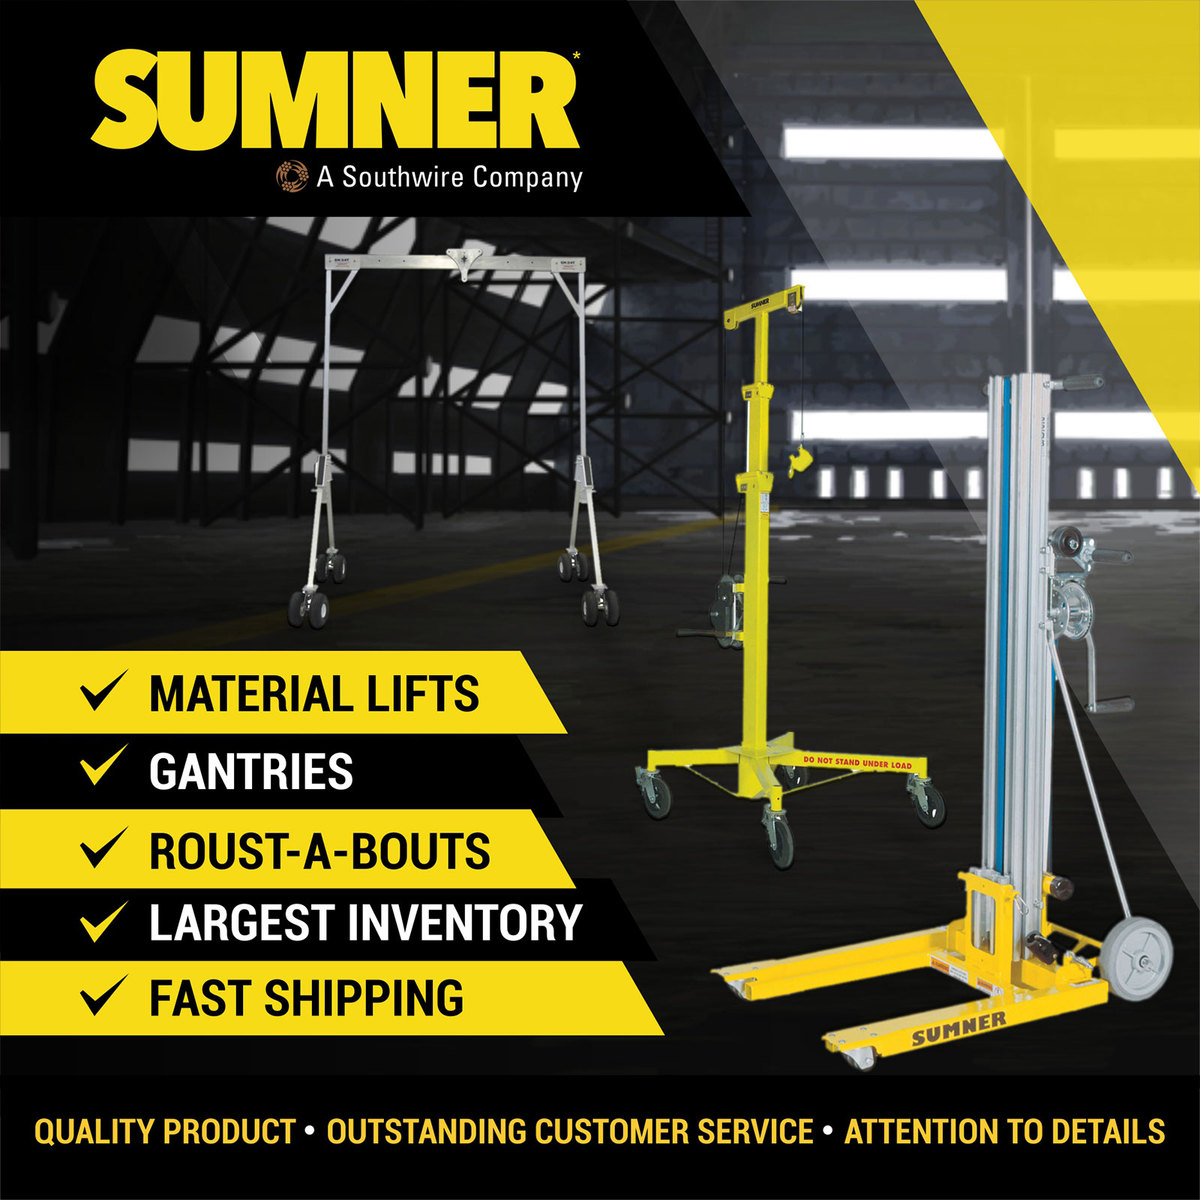 Sumner material lifts, grantires, roust-a-bouts, and all products